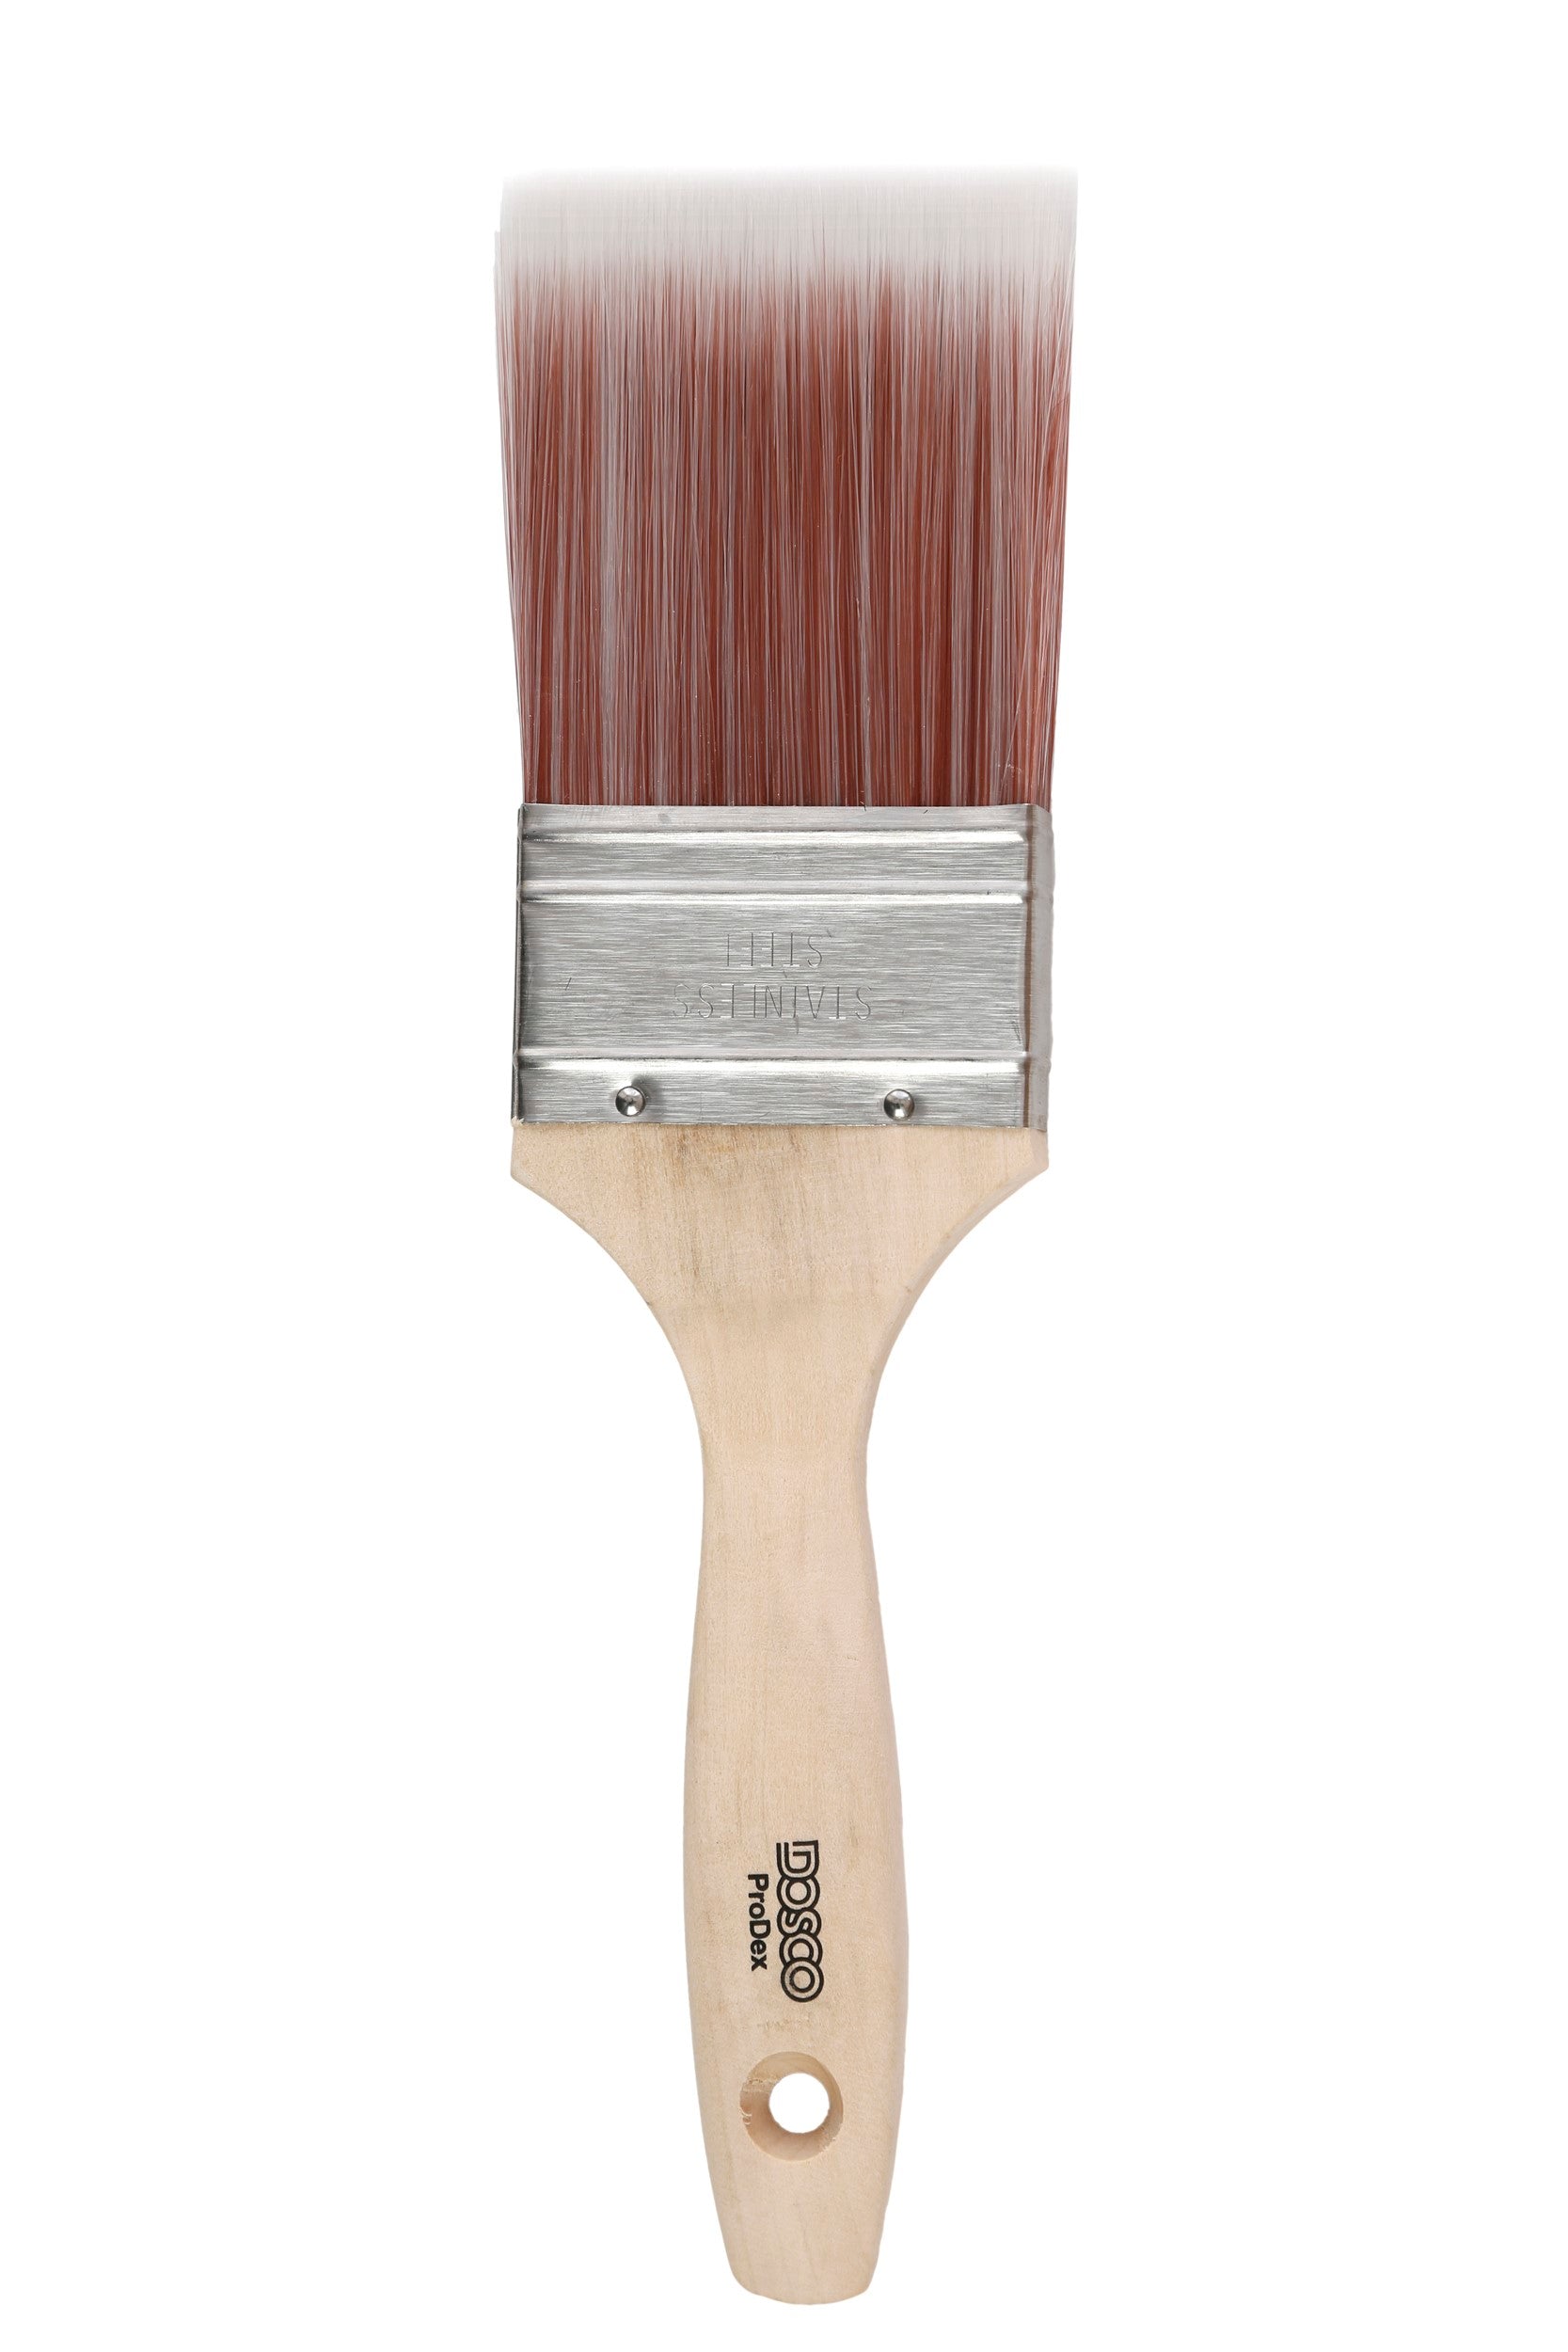 Paint & Decorating | DOSCO Pro-Dex Synthetic Paint Brush 4 inch by Weirs of Baggot St